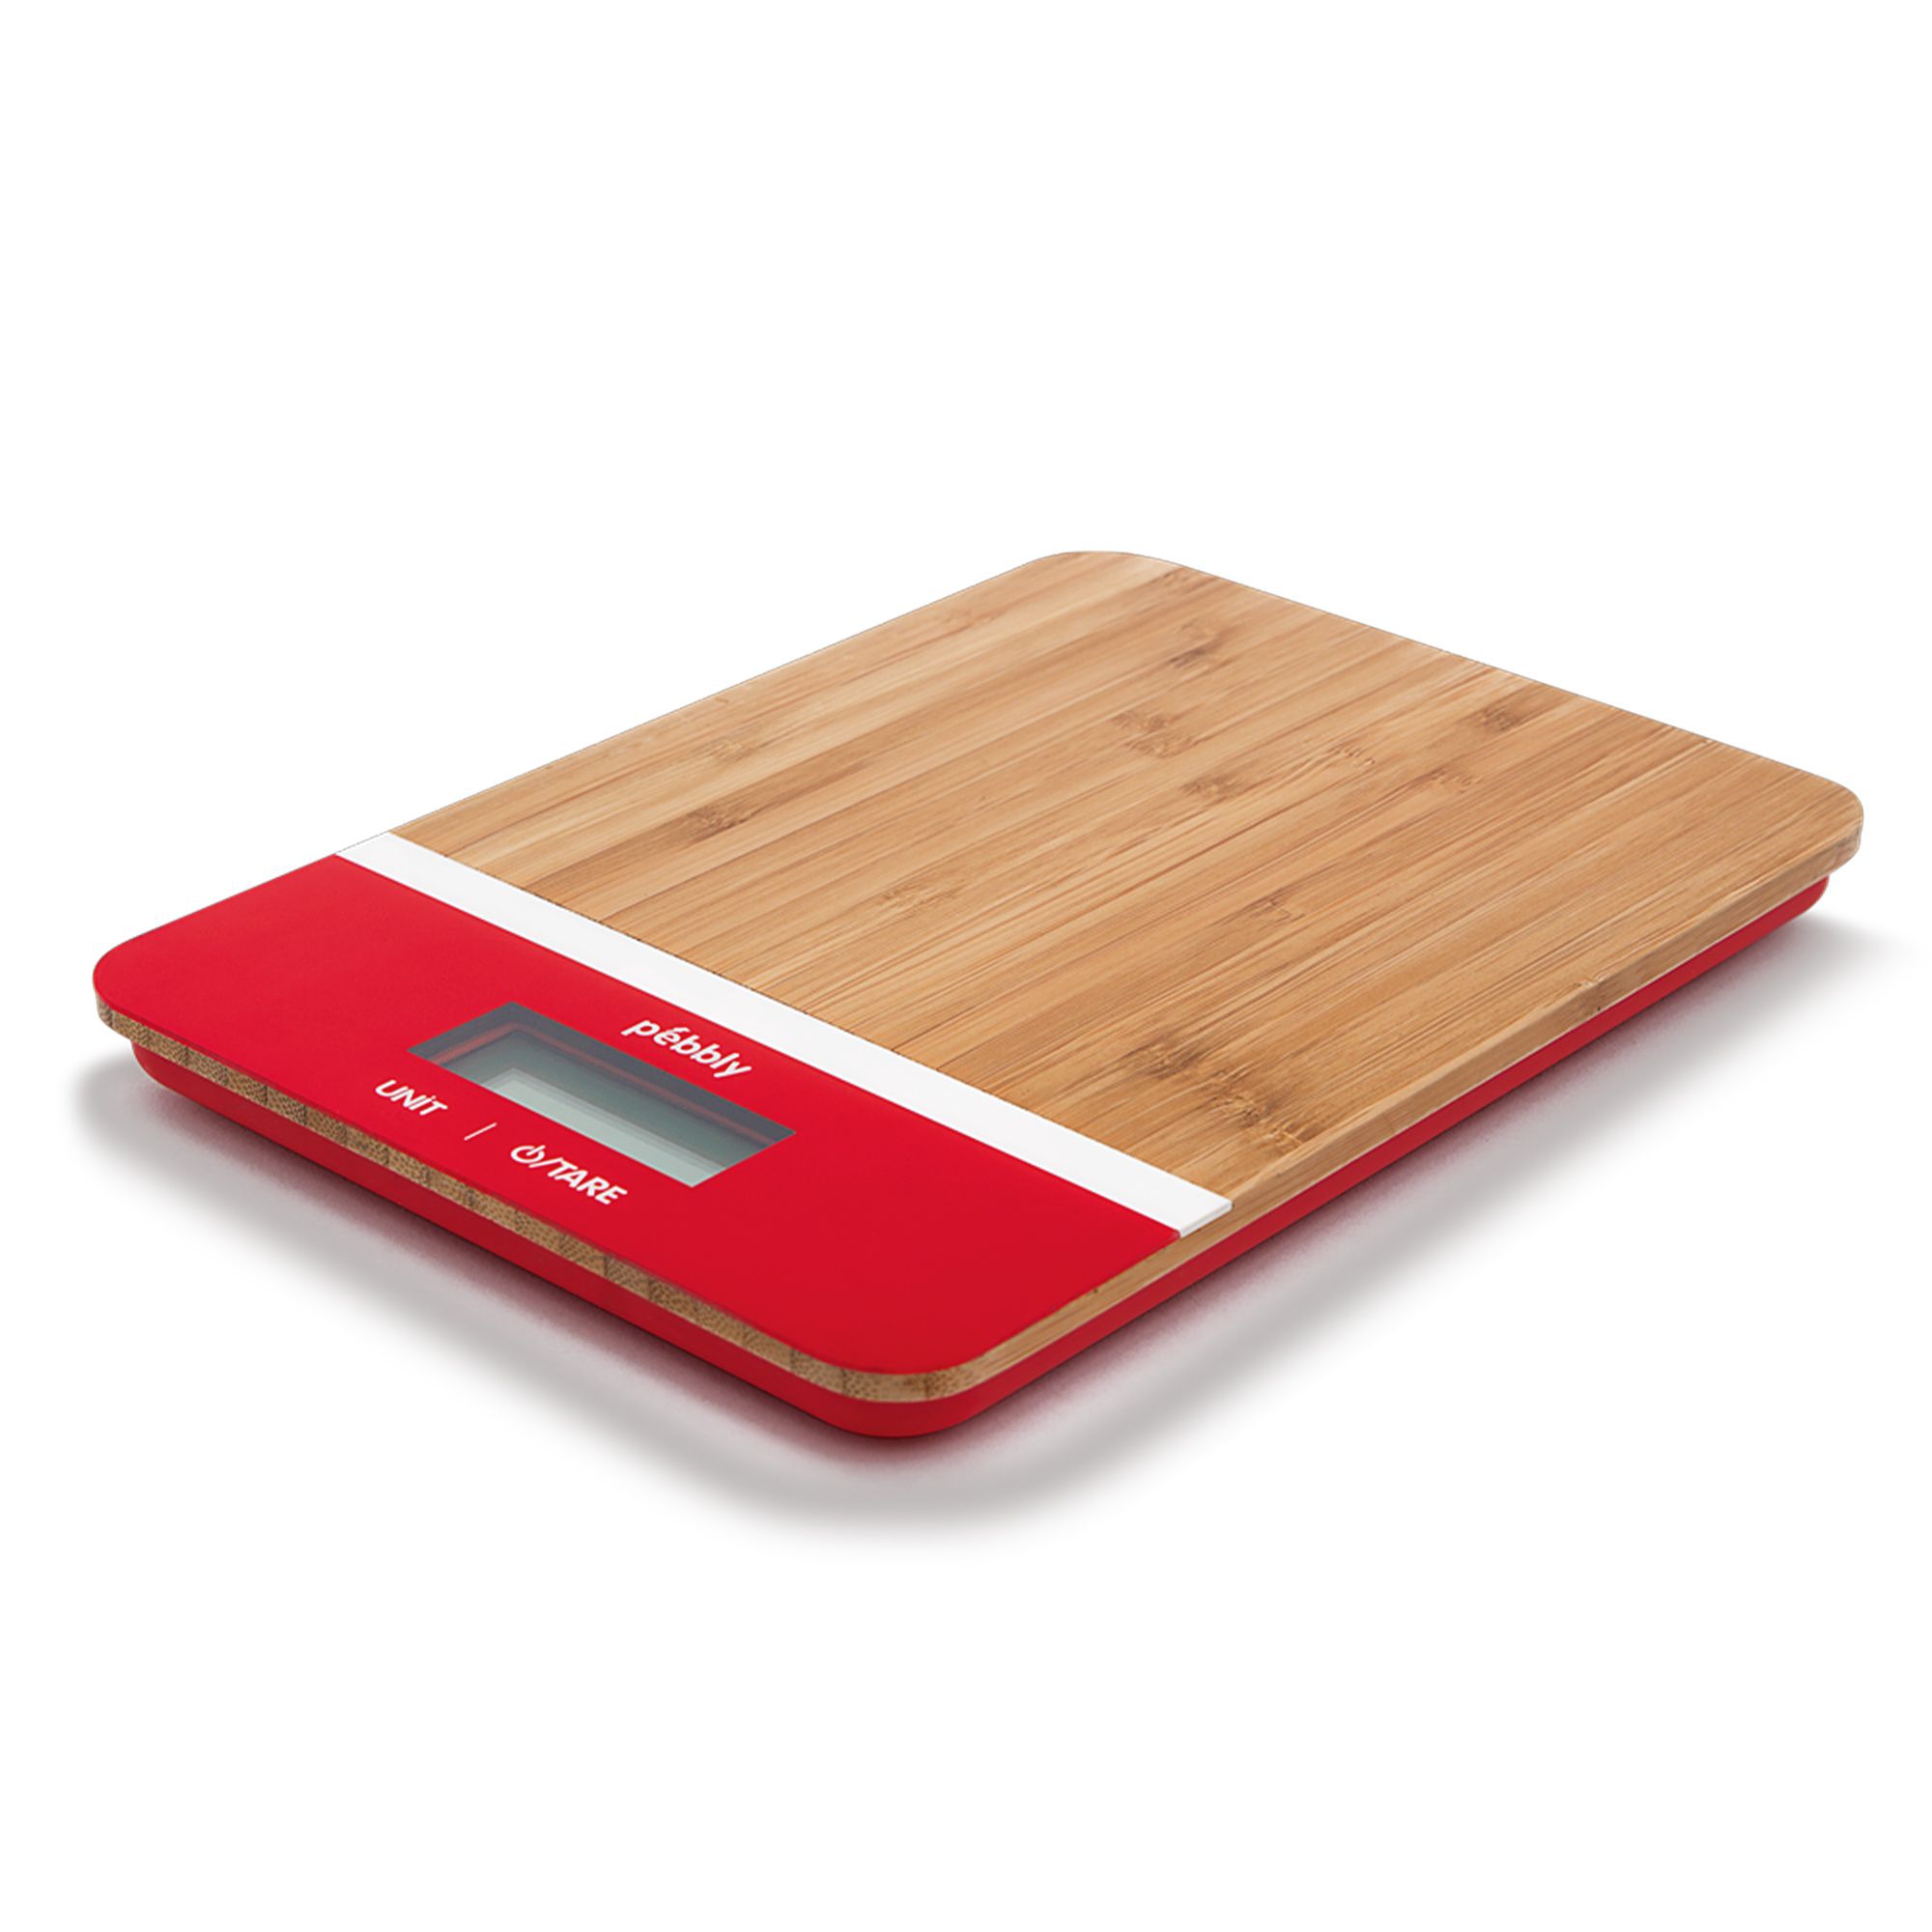 Pebbly - Rectangular bamboo kitchen scale  - Red